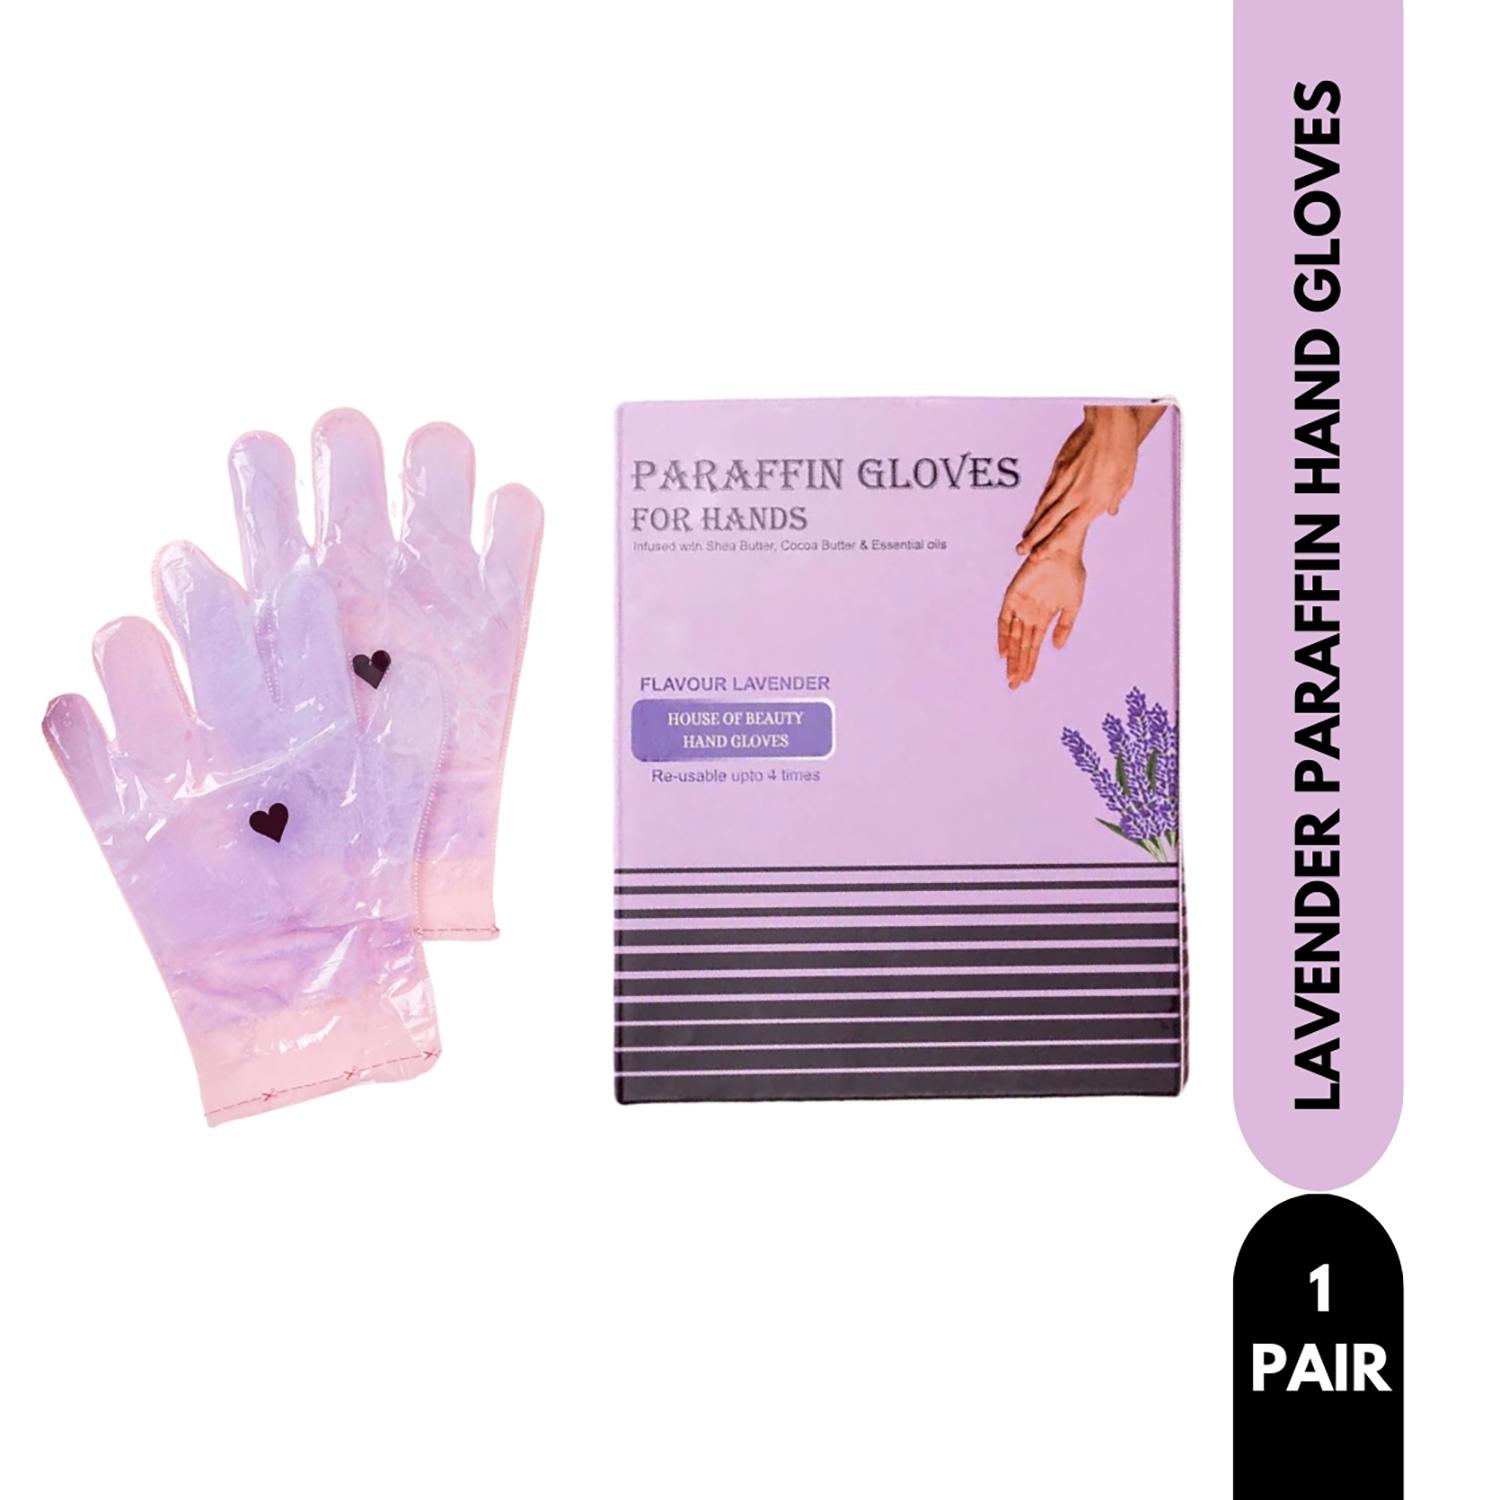 House of Beauty | House of Beauty Aloe Vera Paraffin Hand Gloves-At Home Manicure For Soft, Smooth Hands (1 Pair)